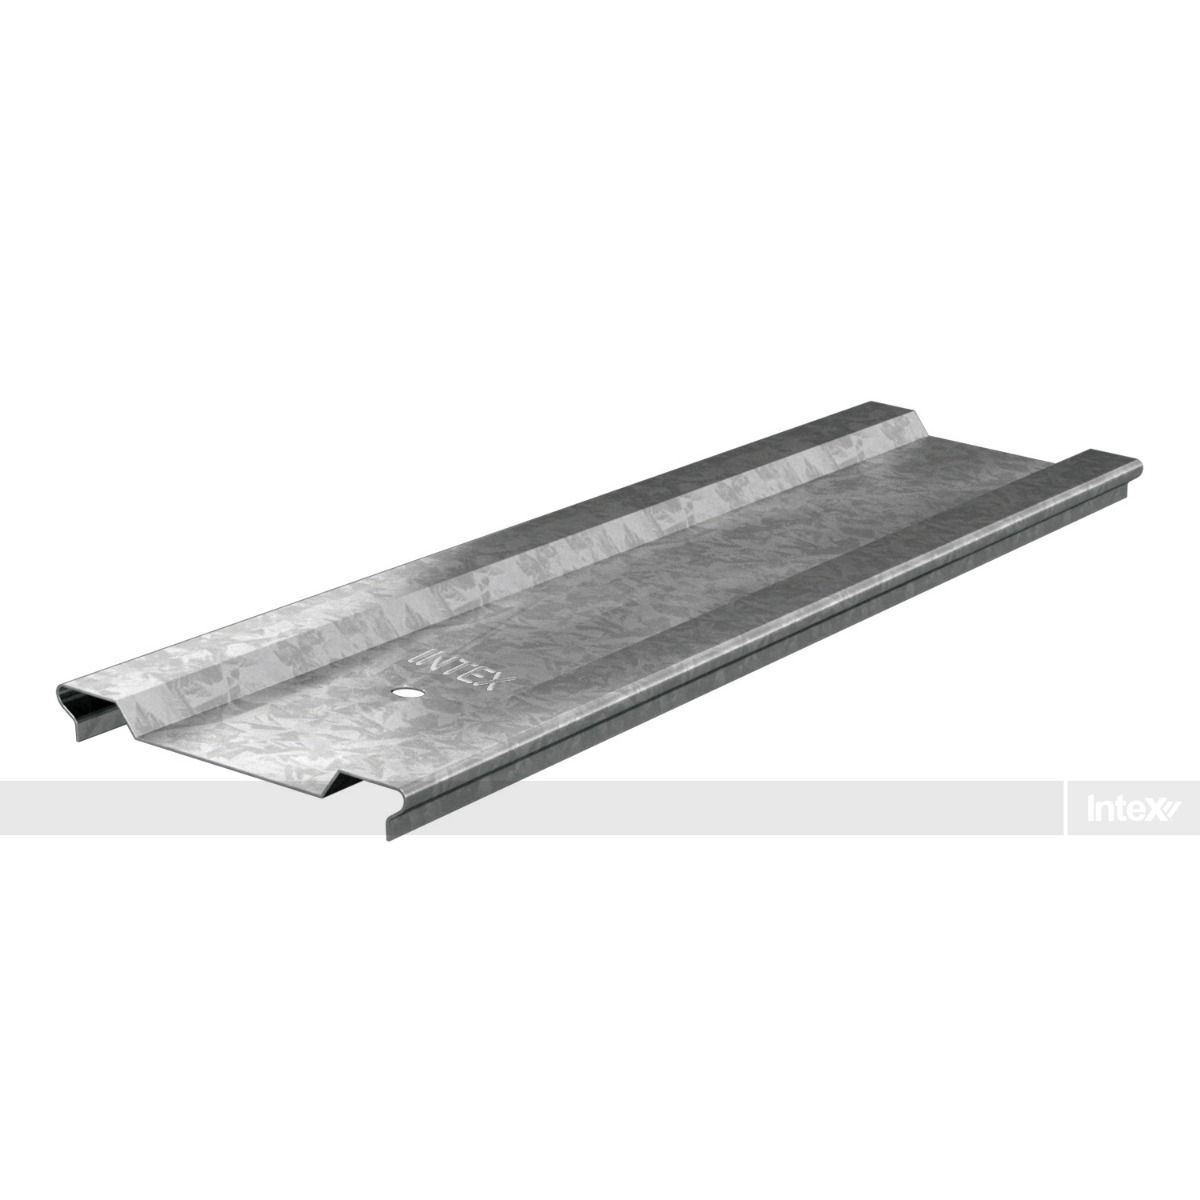 Intex Furring Channel Section Joiner